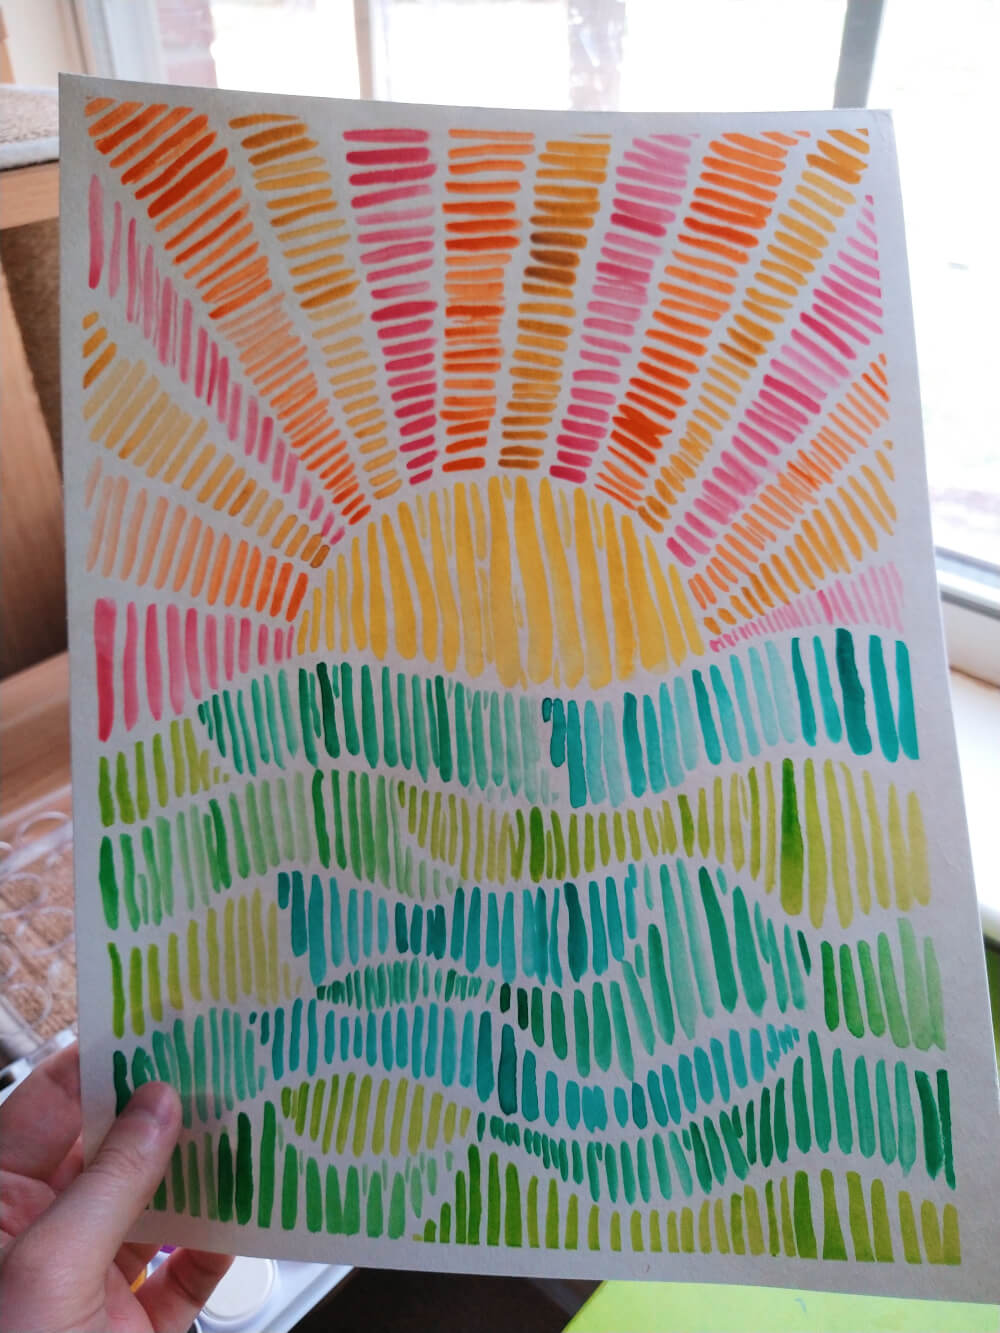 Watercolor painting ft. small vertical lines: wavy sections of differing hues of green lines on the bottom half; yellow lines in a semicircle sun with pink, orange and gold rays of lines